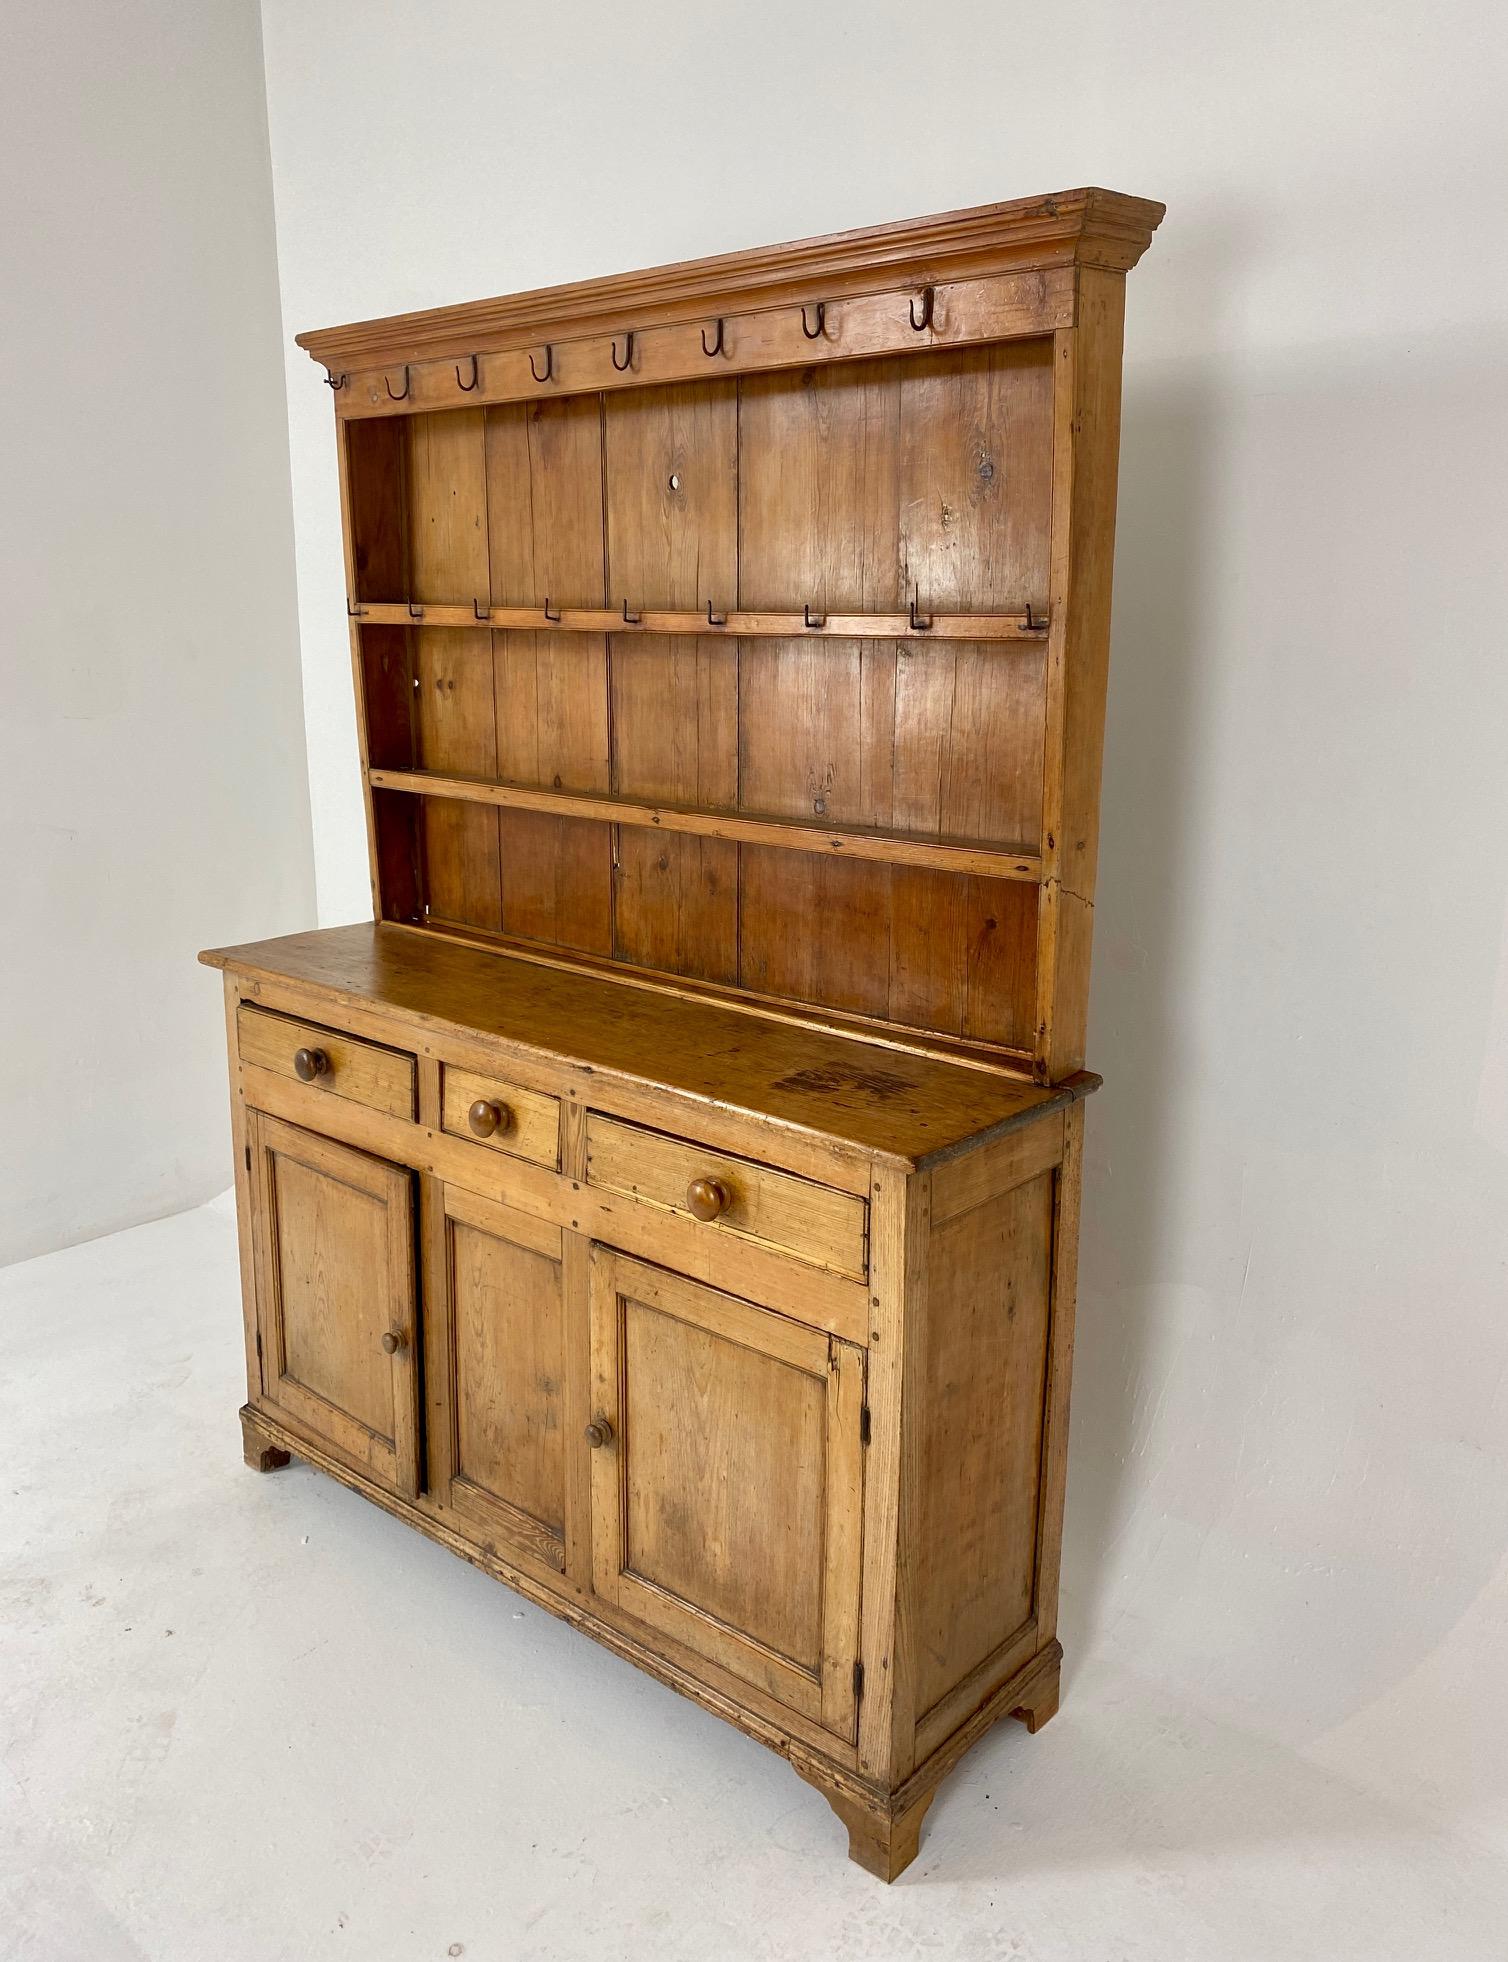 Antique Victorian Pine Farmhouse Welsh Dresser, Buffet + Hutch, Sideboard, Scotland 1880, B659


Scotland 1880
Solid Pine
Original Finish
With plate rack
With a moulded cornice across the top
Seven iron hooks below cornice
Pair of shelves